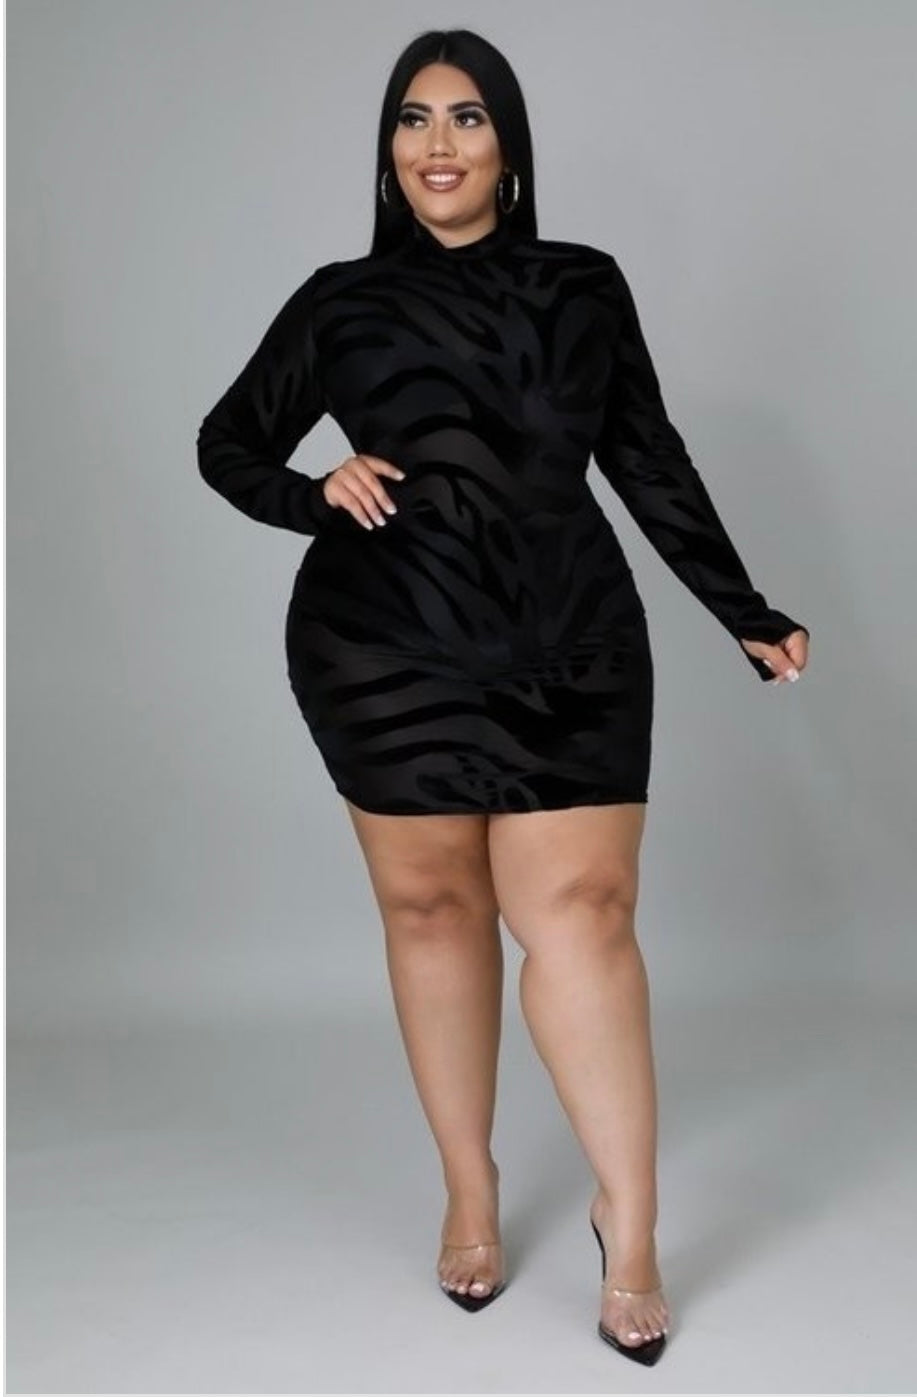 Curvy Diva – Pink Touch Fashion & Beauty